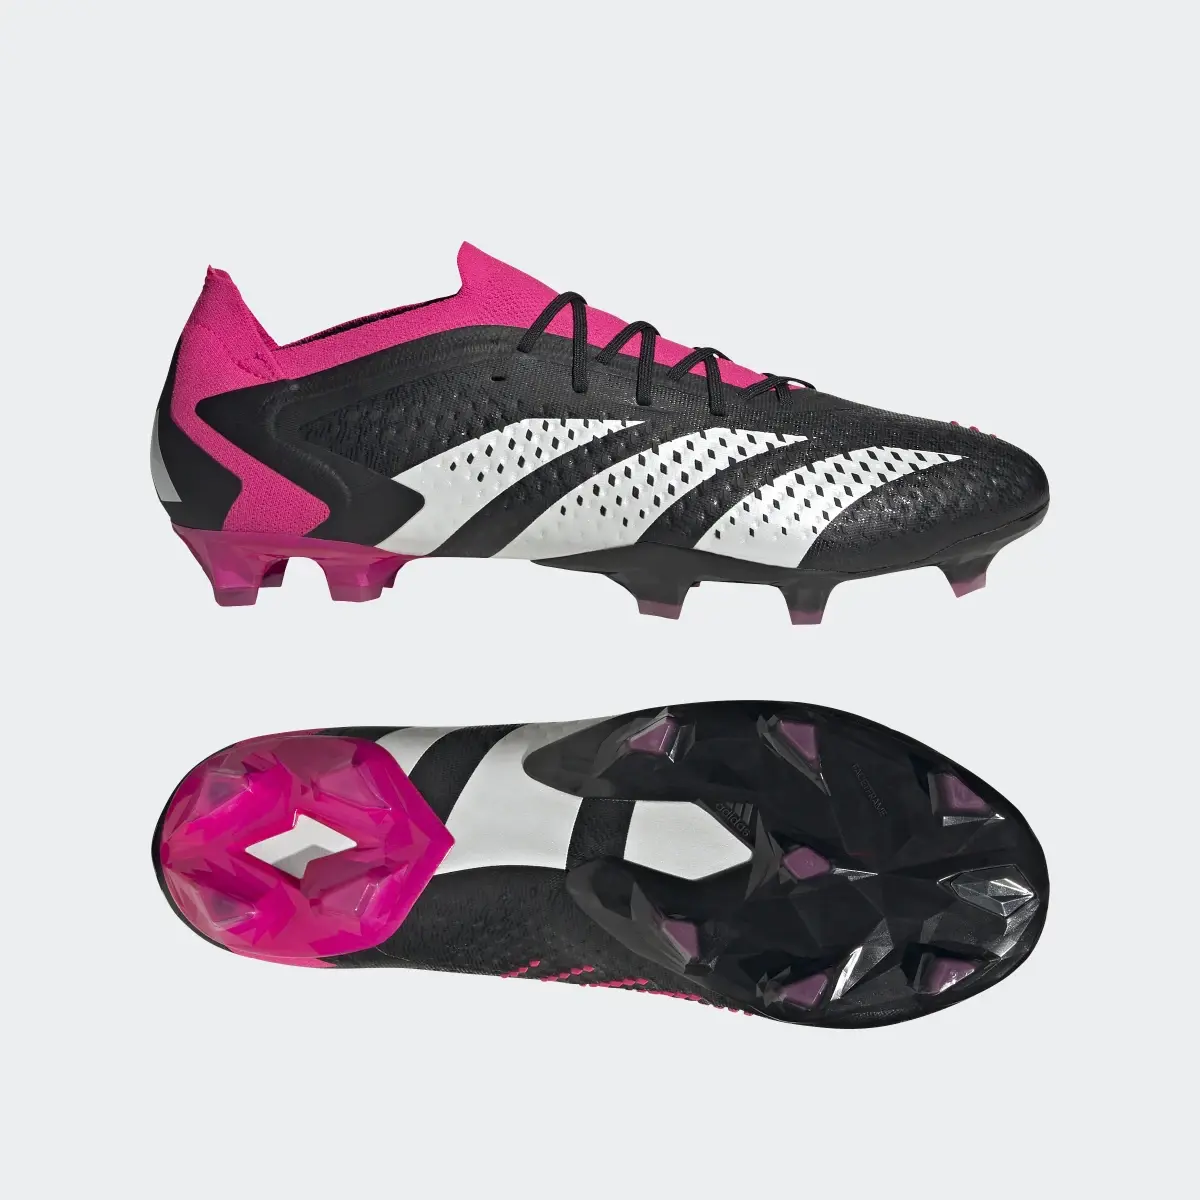 Adidas Predator Accuracy.1 Low Firm Ground Boots. 1